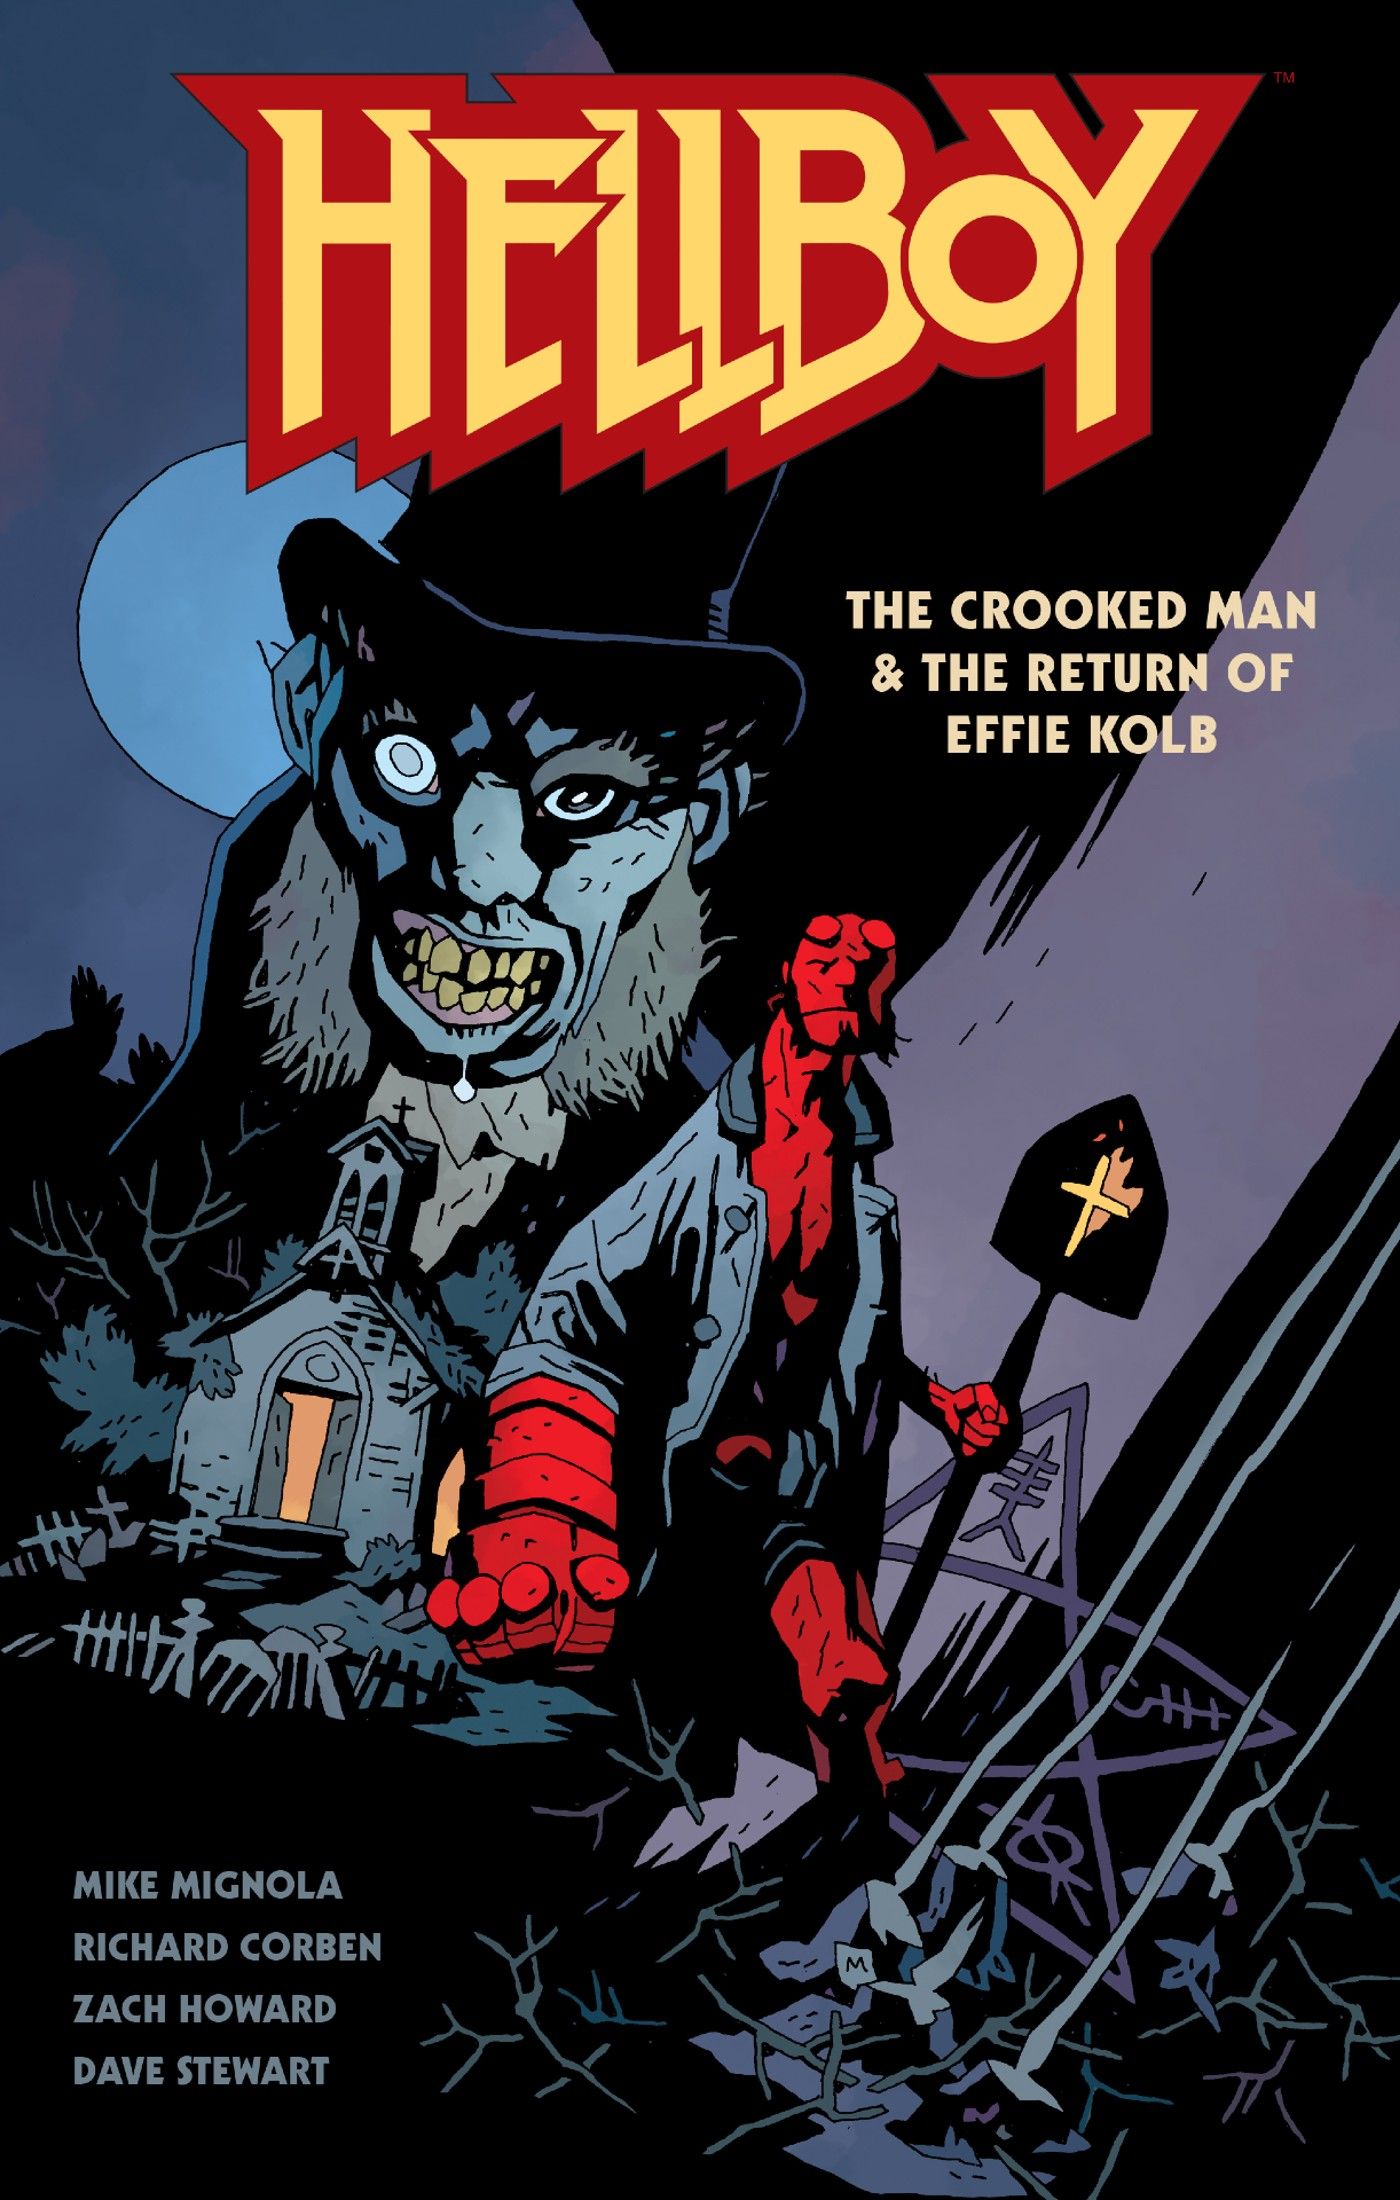 Exclusive Cover Reveal for TWO New Hellboy Releases